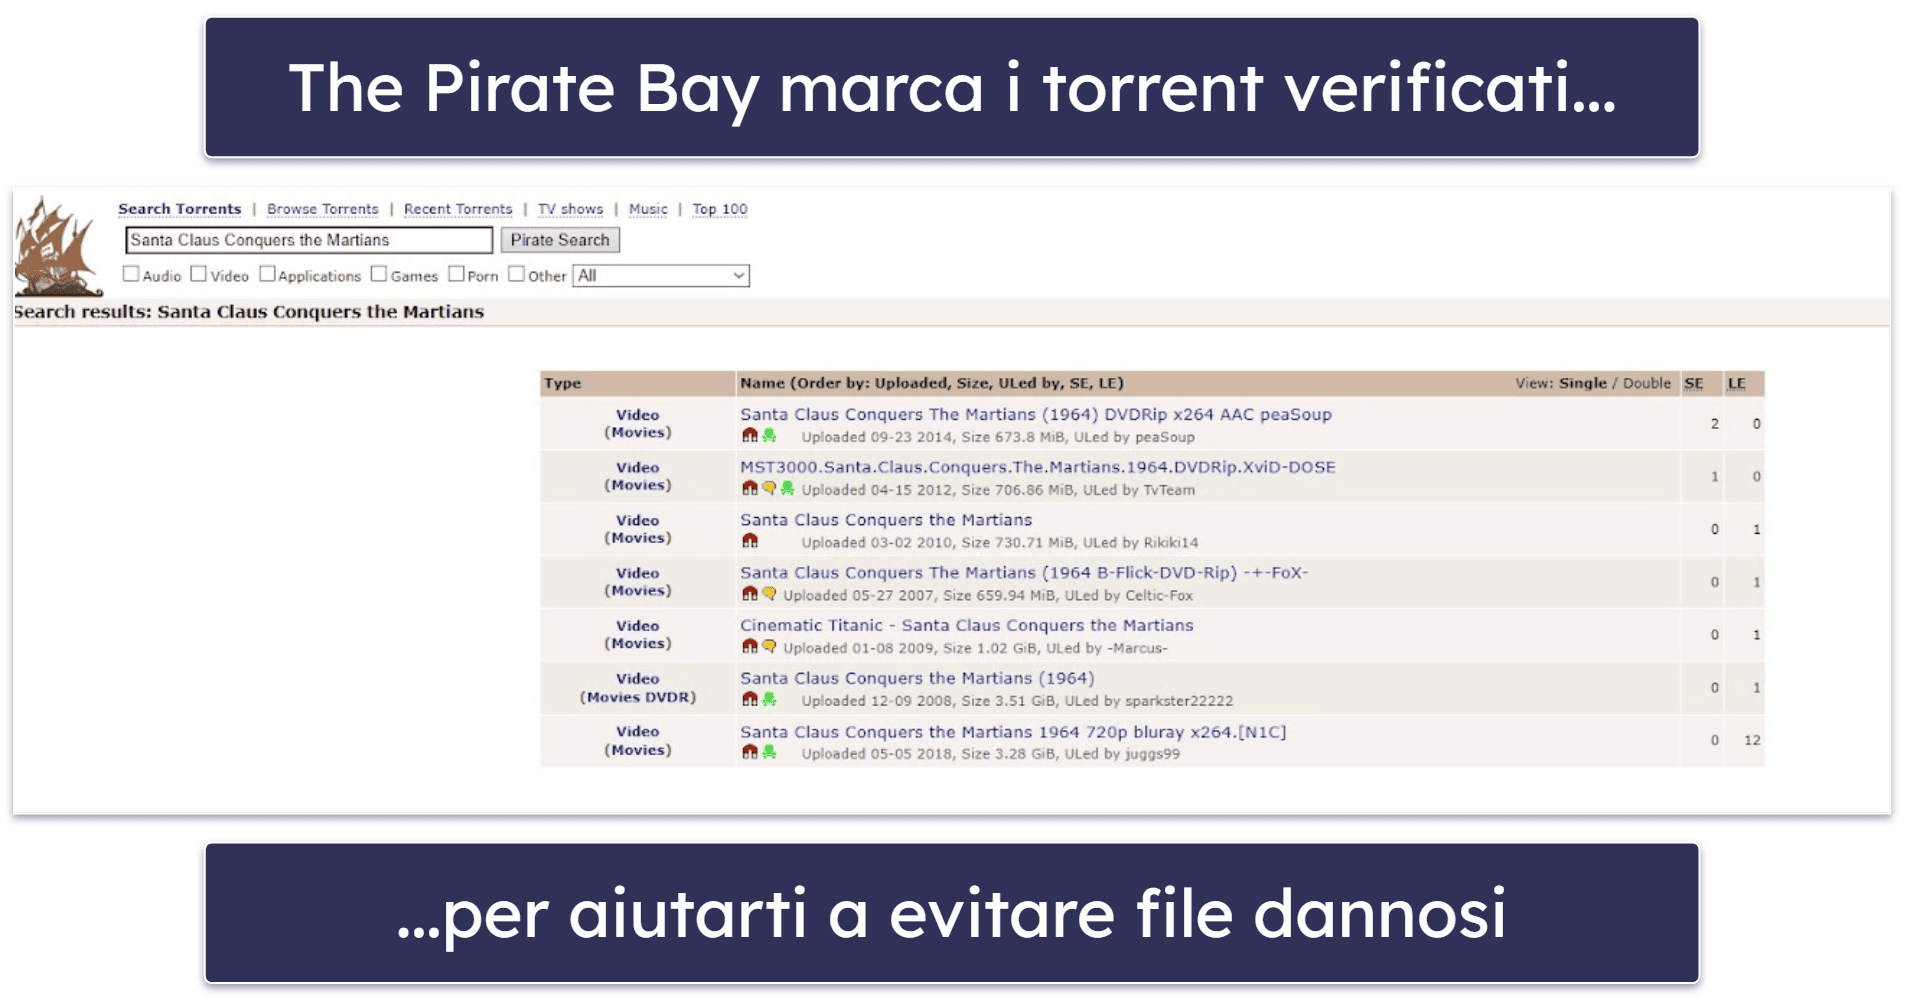 3. The Pirate Bay